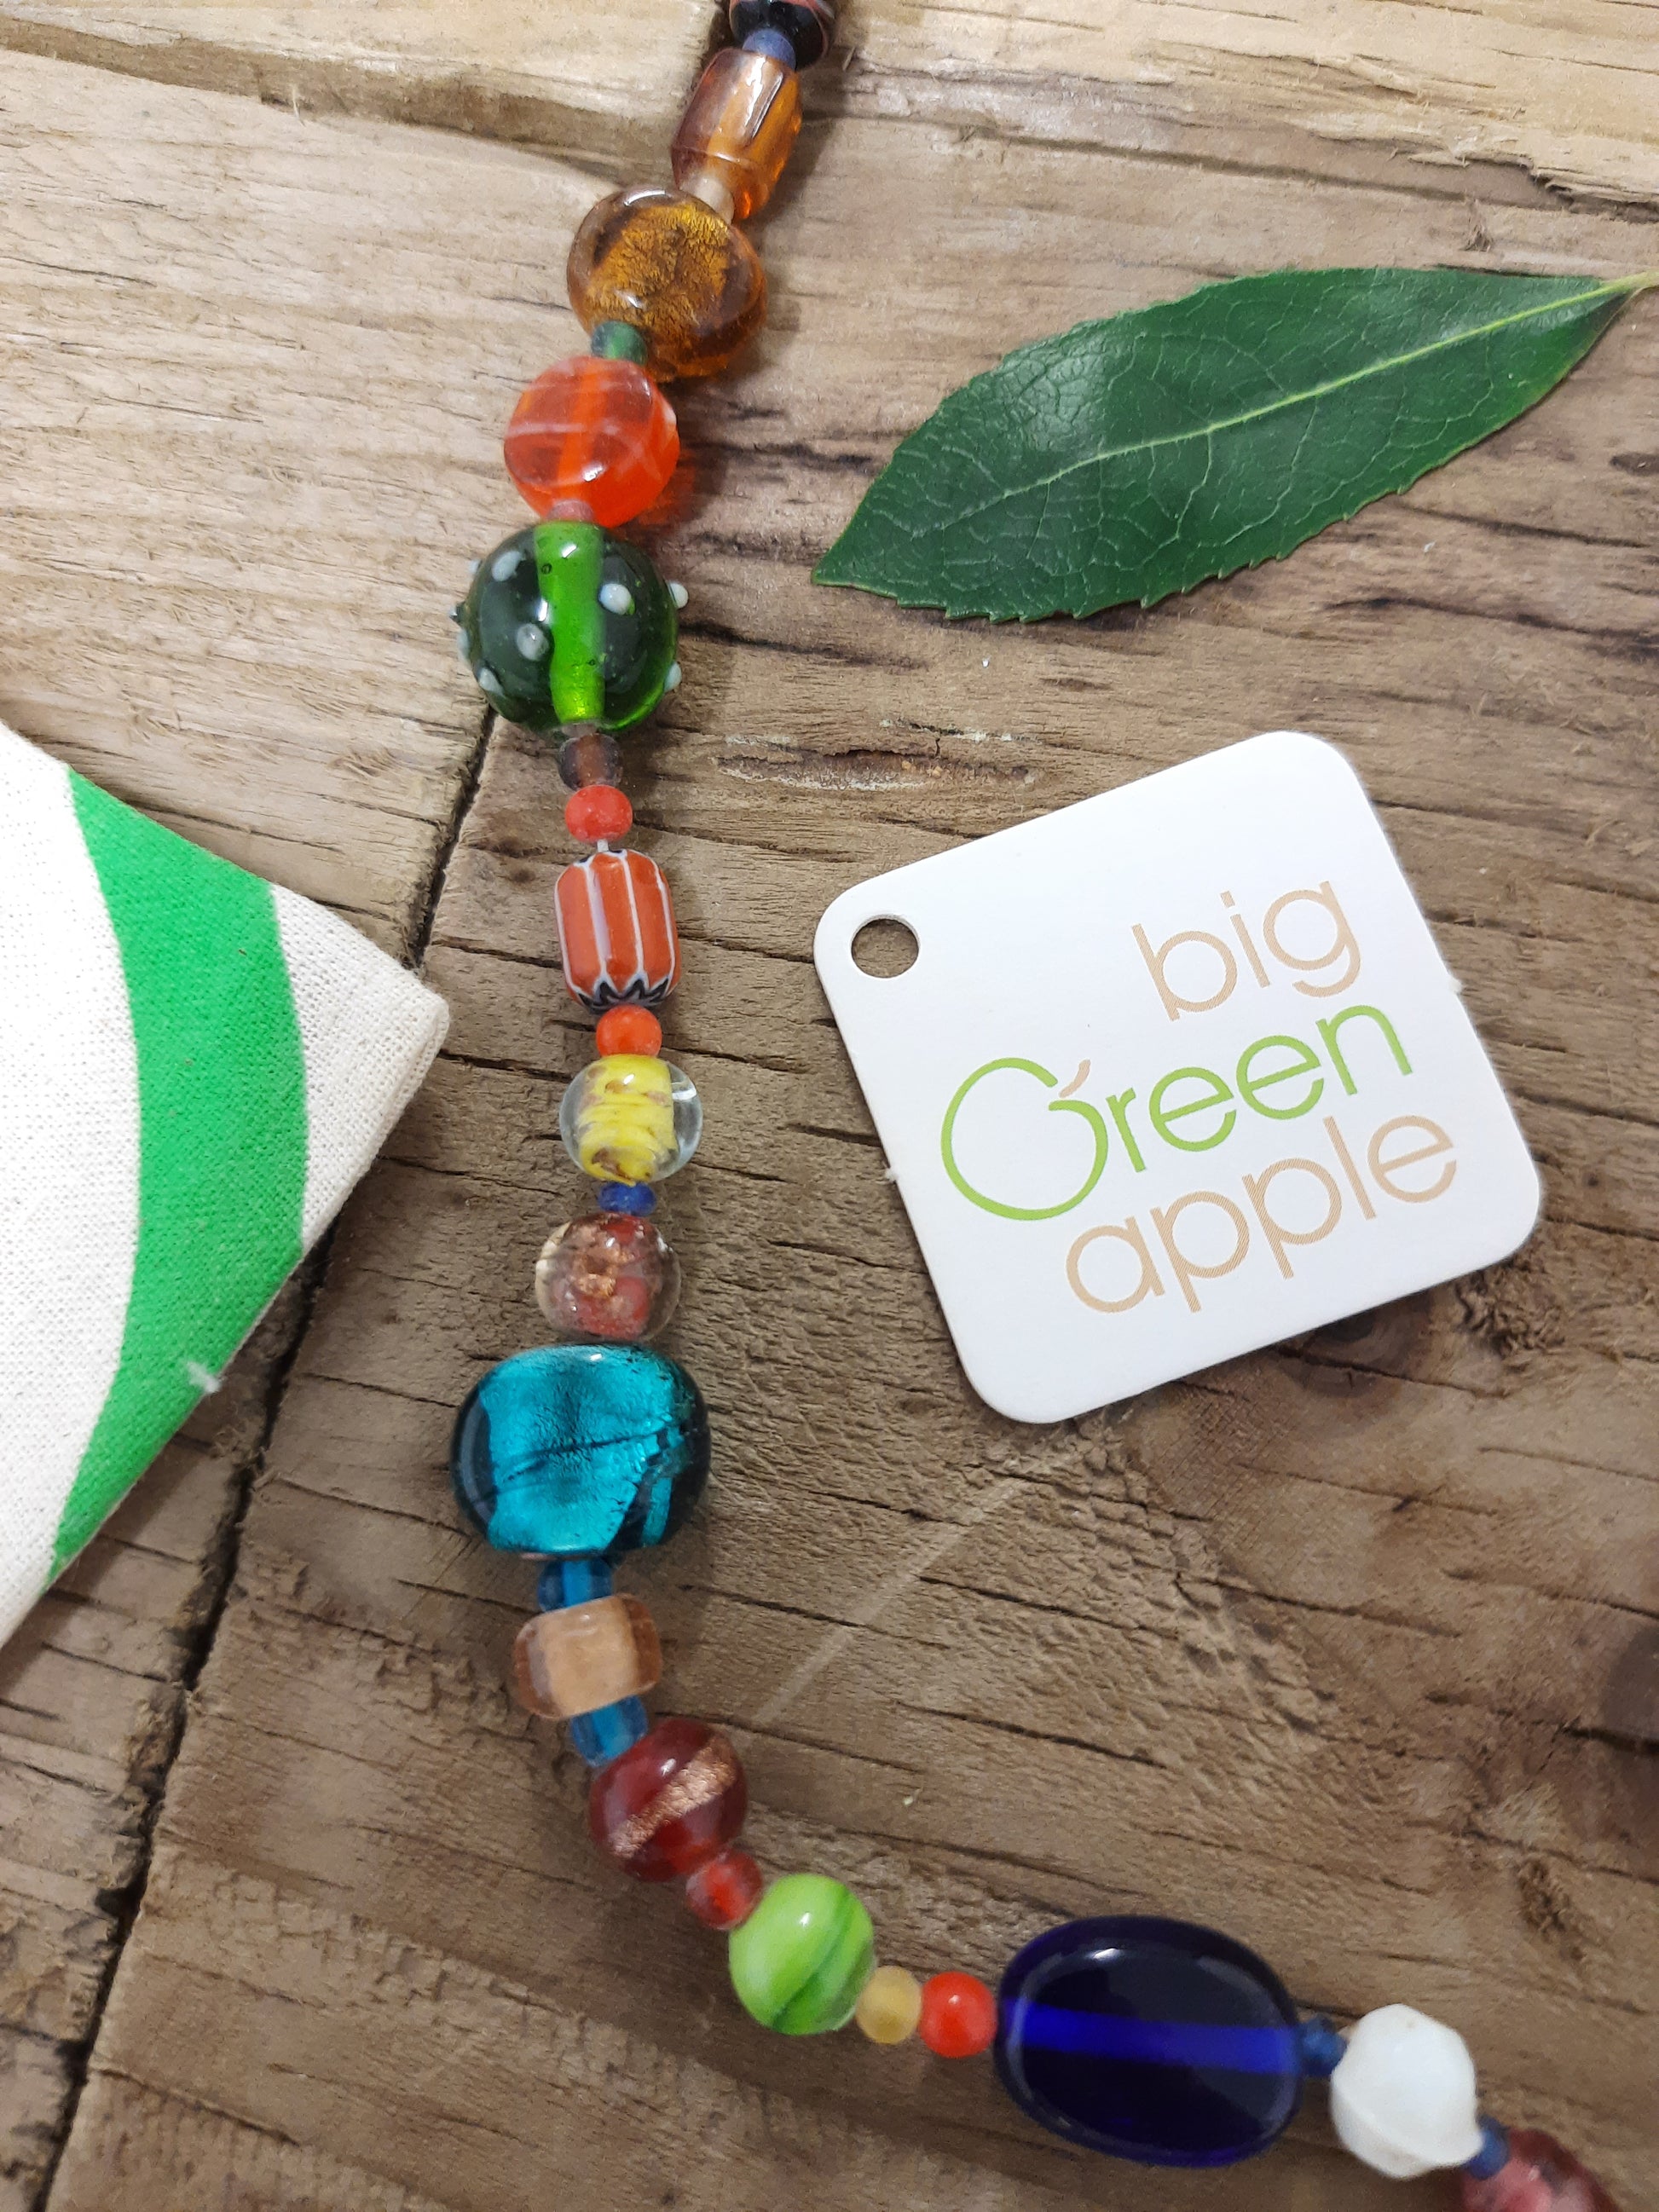 Eco Shop Online, Necklaces, Fair Trade Products, Sustainable Company, Gift, UK Ethical Jewellery, BIG GREEN APPLE